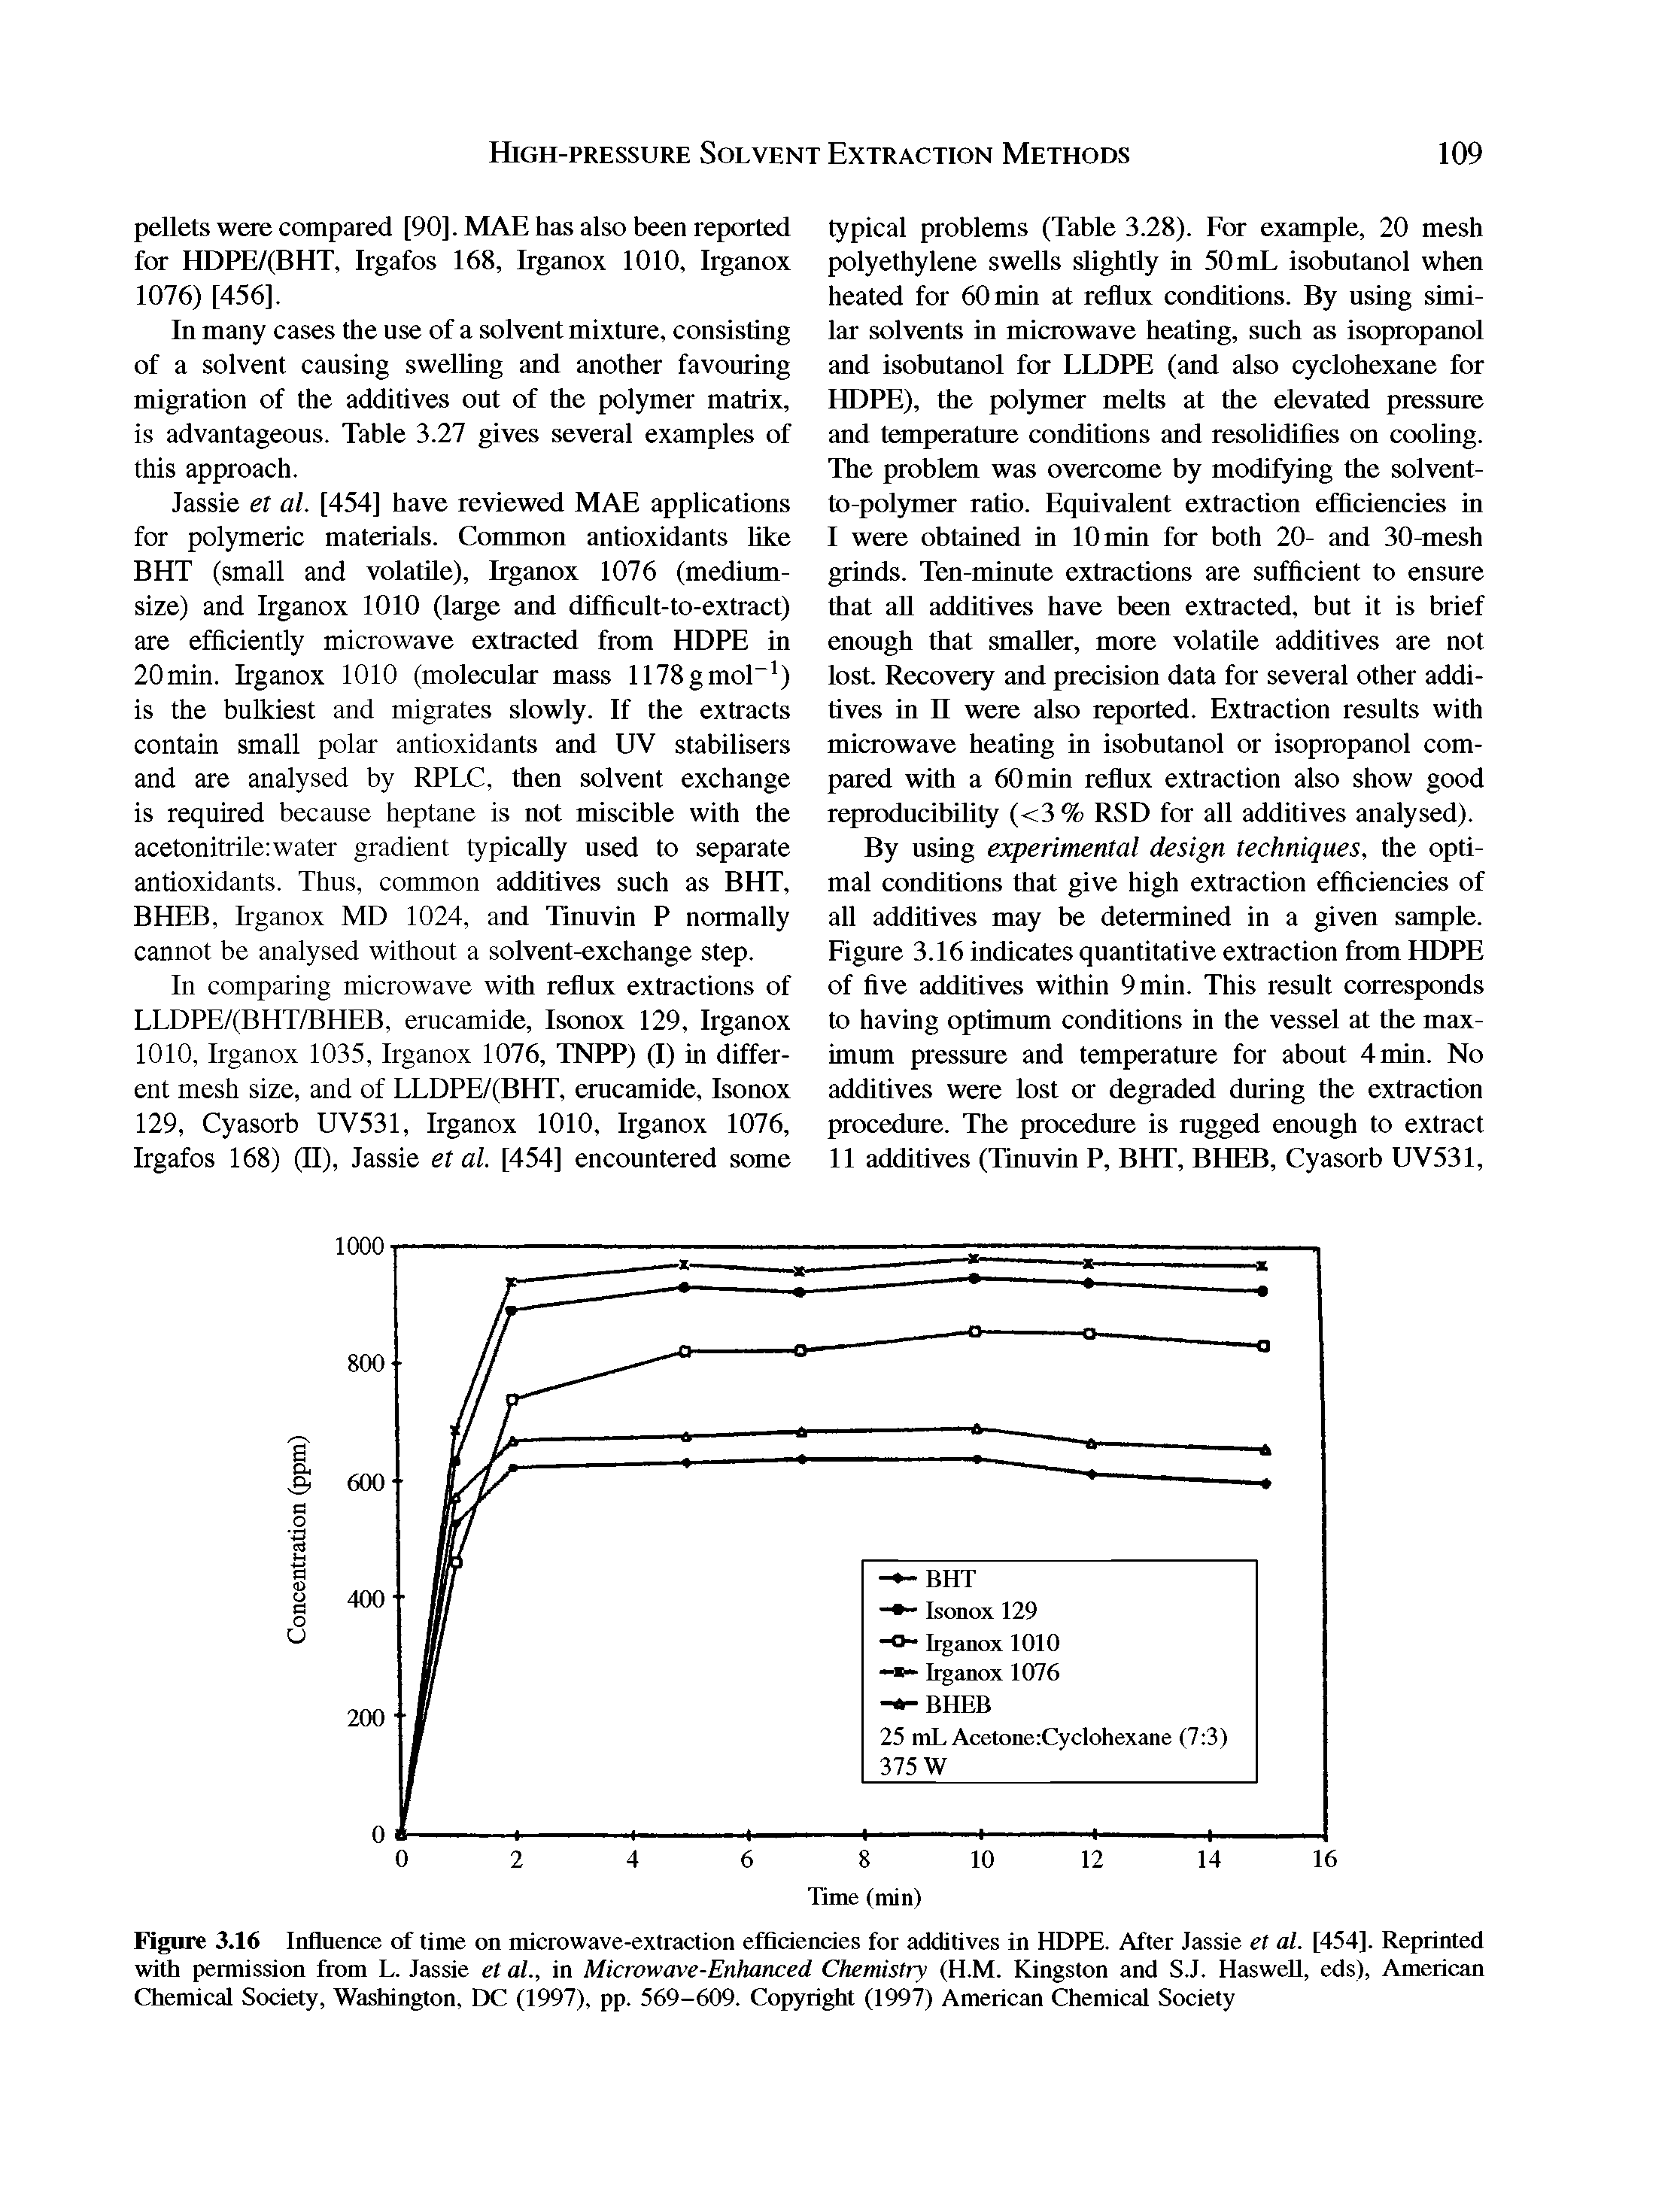 Figure 3.16 Influence of time on microwave-extraction efficiencies for additives in HDPE. After Jassie et al. [454]. Reprinted with permission from L. Jassie et al., in Microwave-Enhanced Chemistry (H.M. Kingston and S.J. Haswefl, eds), American Chemical Society, Washington, DC (1997), pp. 569-609. Copyright (1997) American Chemical Society...